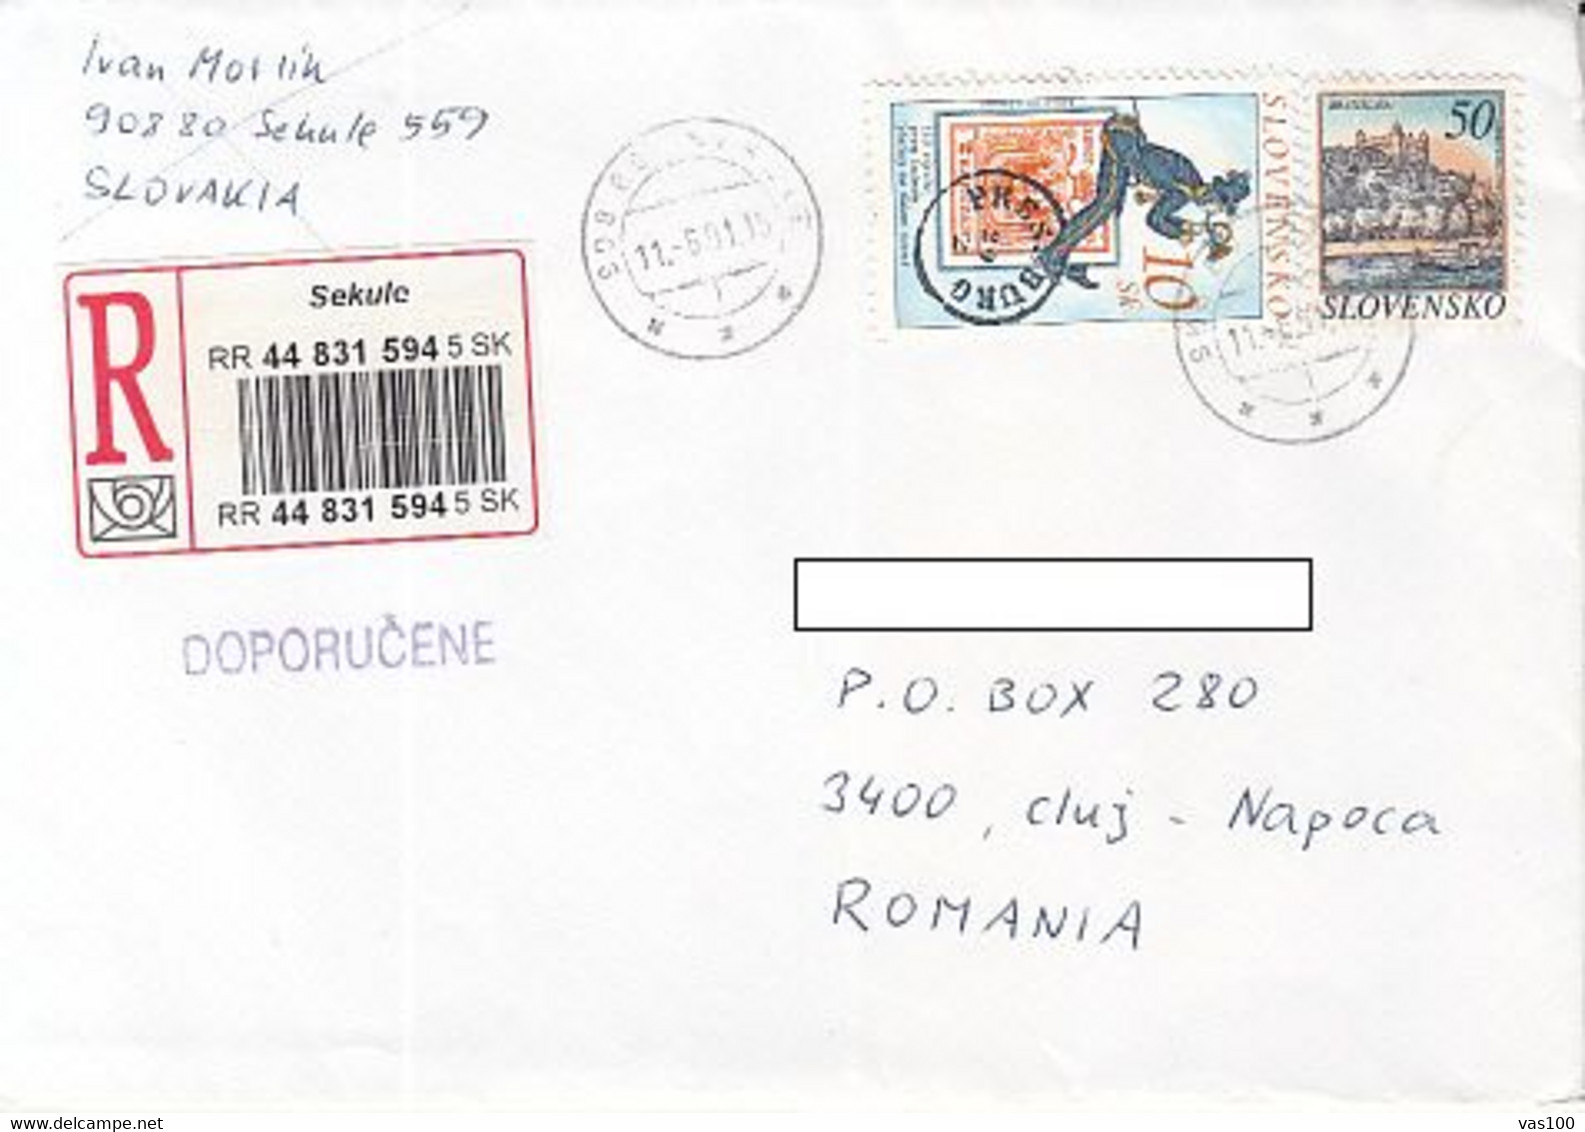 STAMP'S DAY, BRATISLAVA CASTLE, STAMPS ON REGISTERED COVER, 2001, SLOVAKIA - Covers & Documents